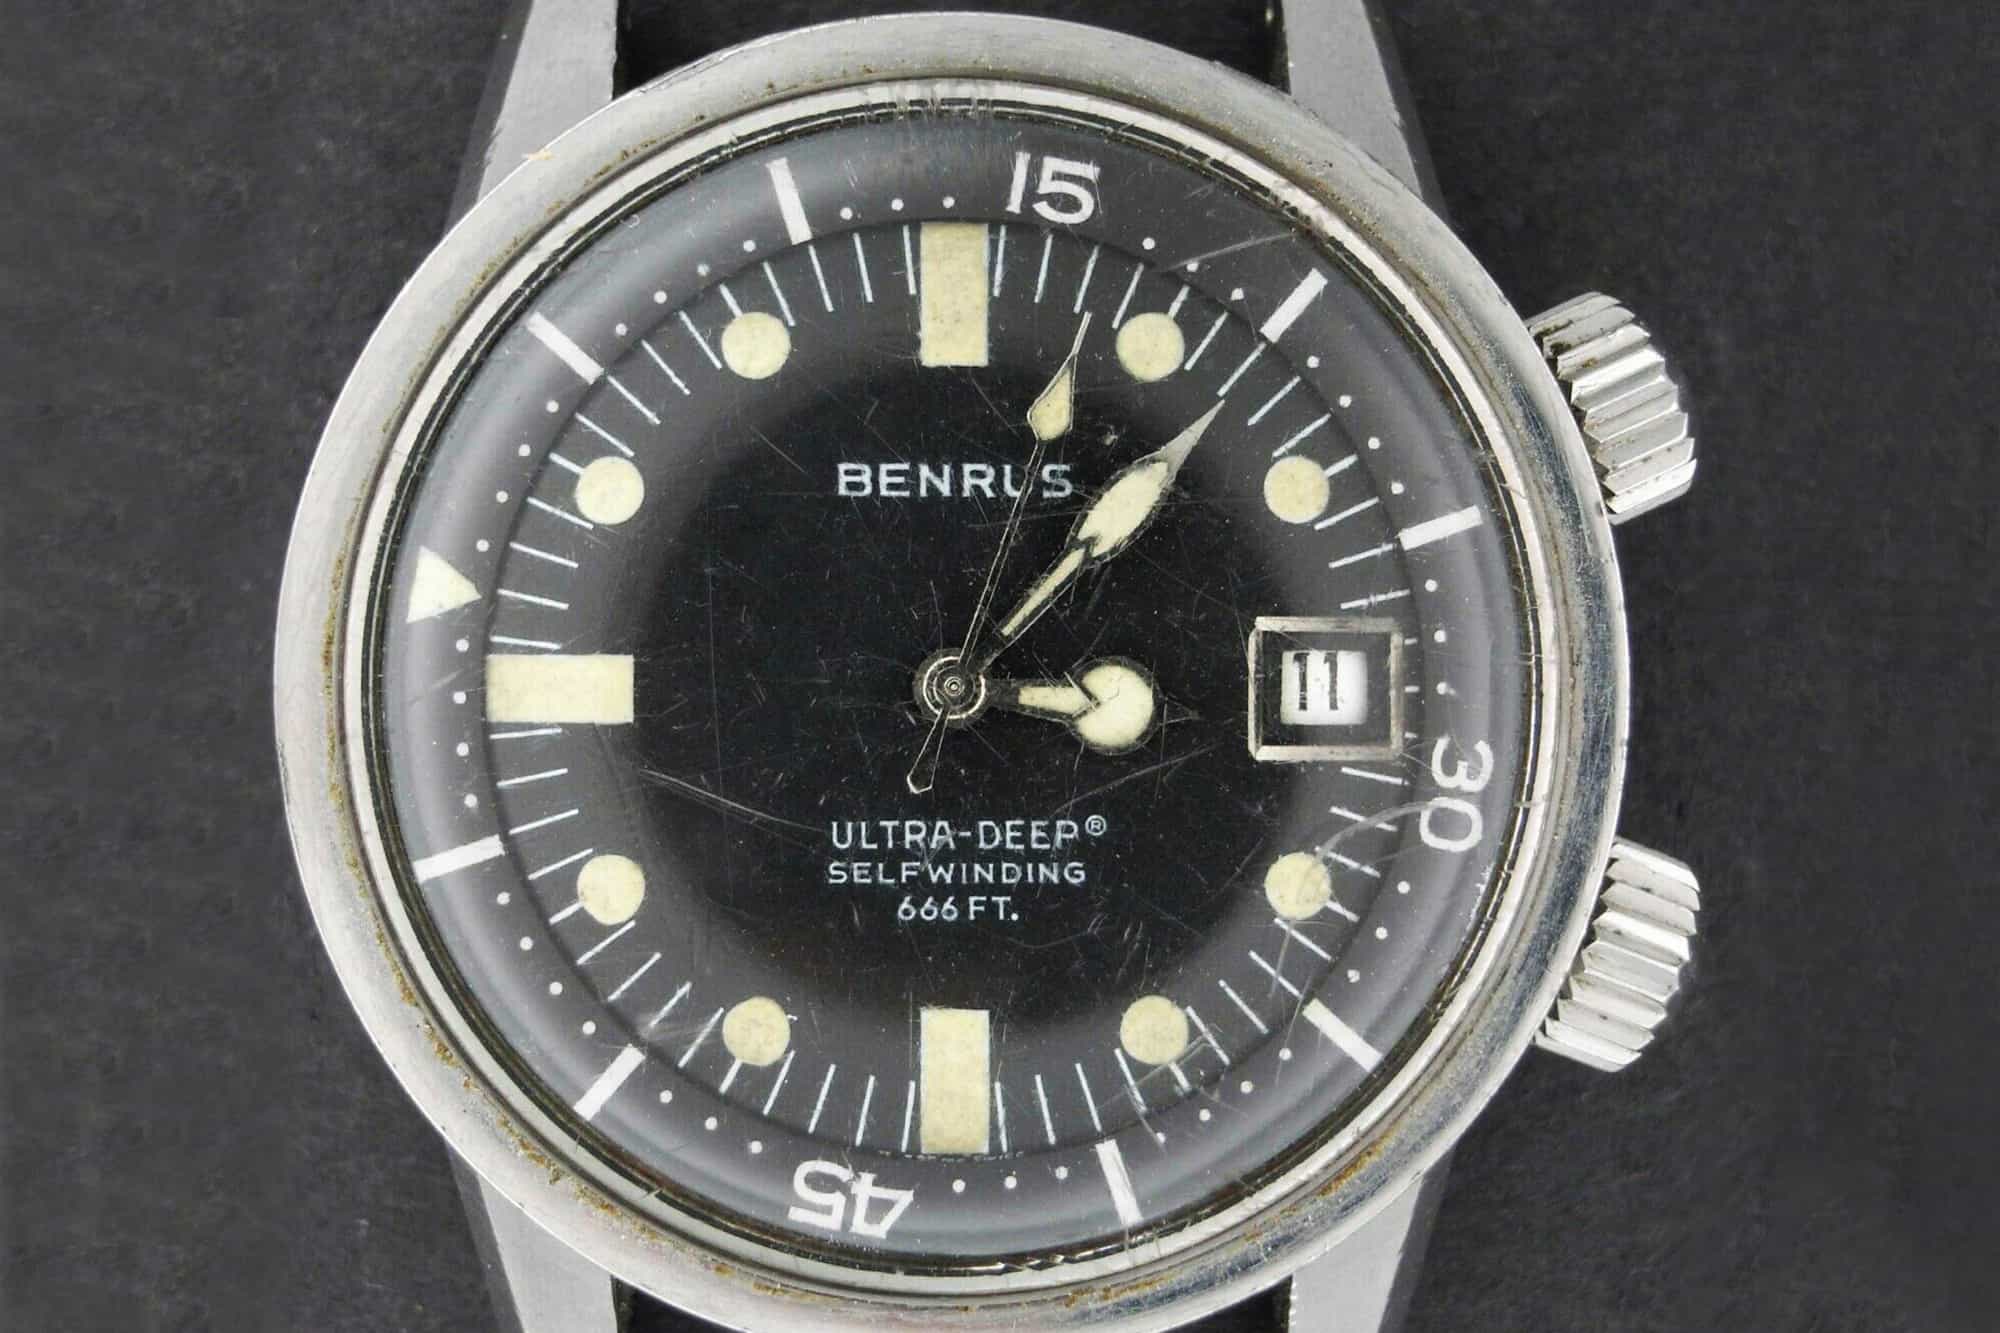 eBay Finds: Benrus Ultra Deep Super Compressor, Nivada Grenchen Chronoking, and More